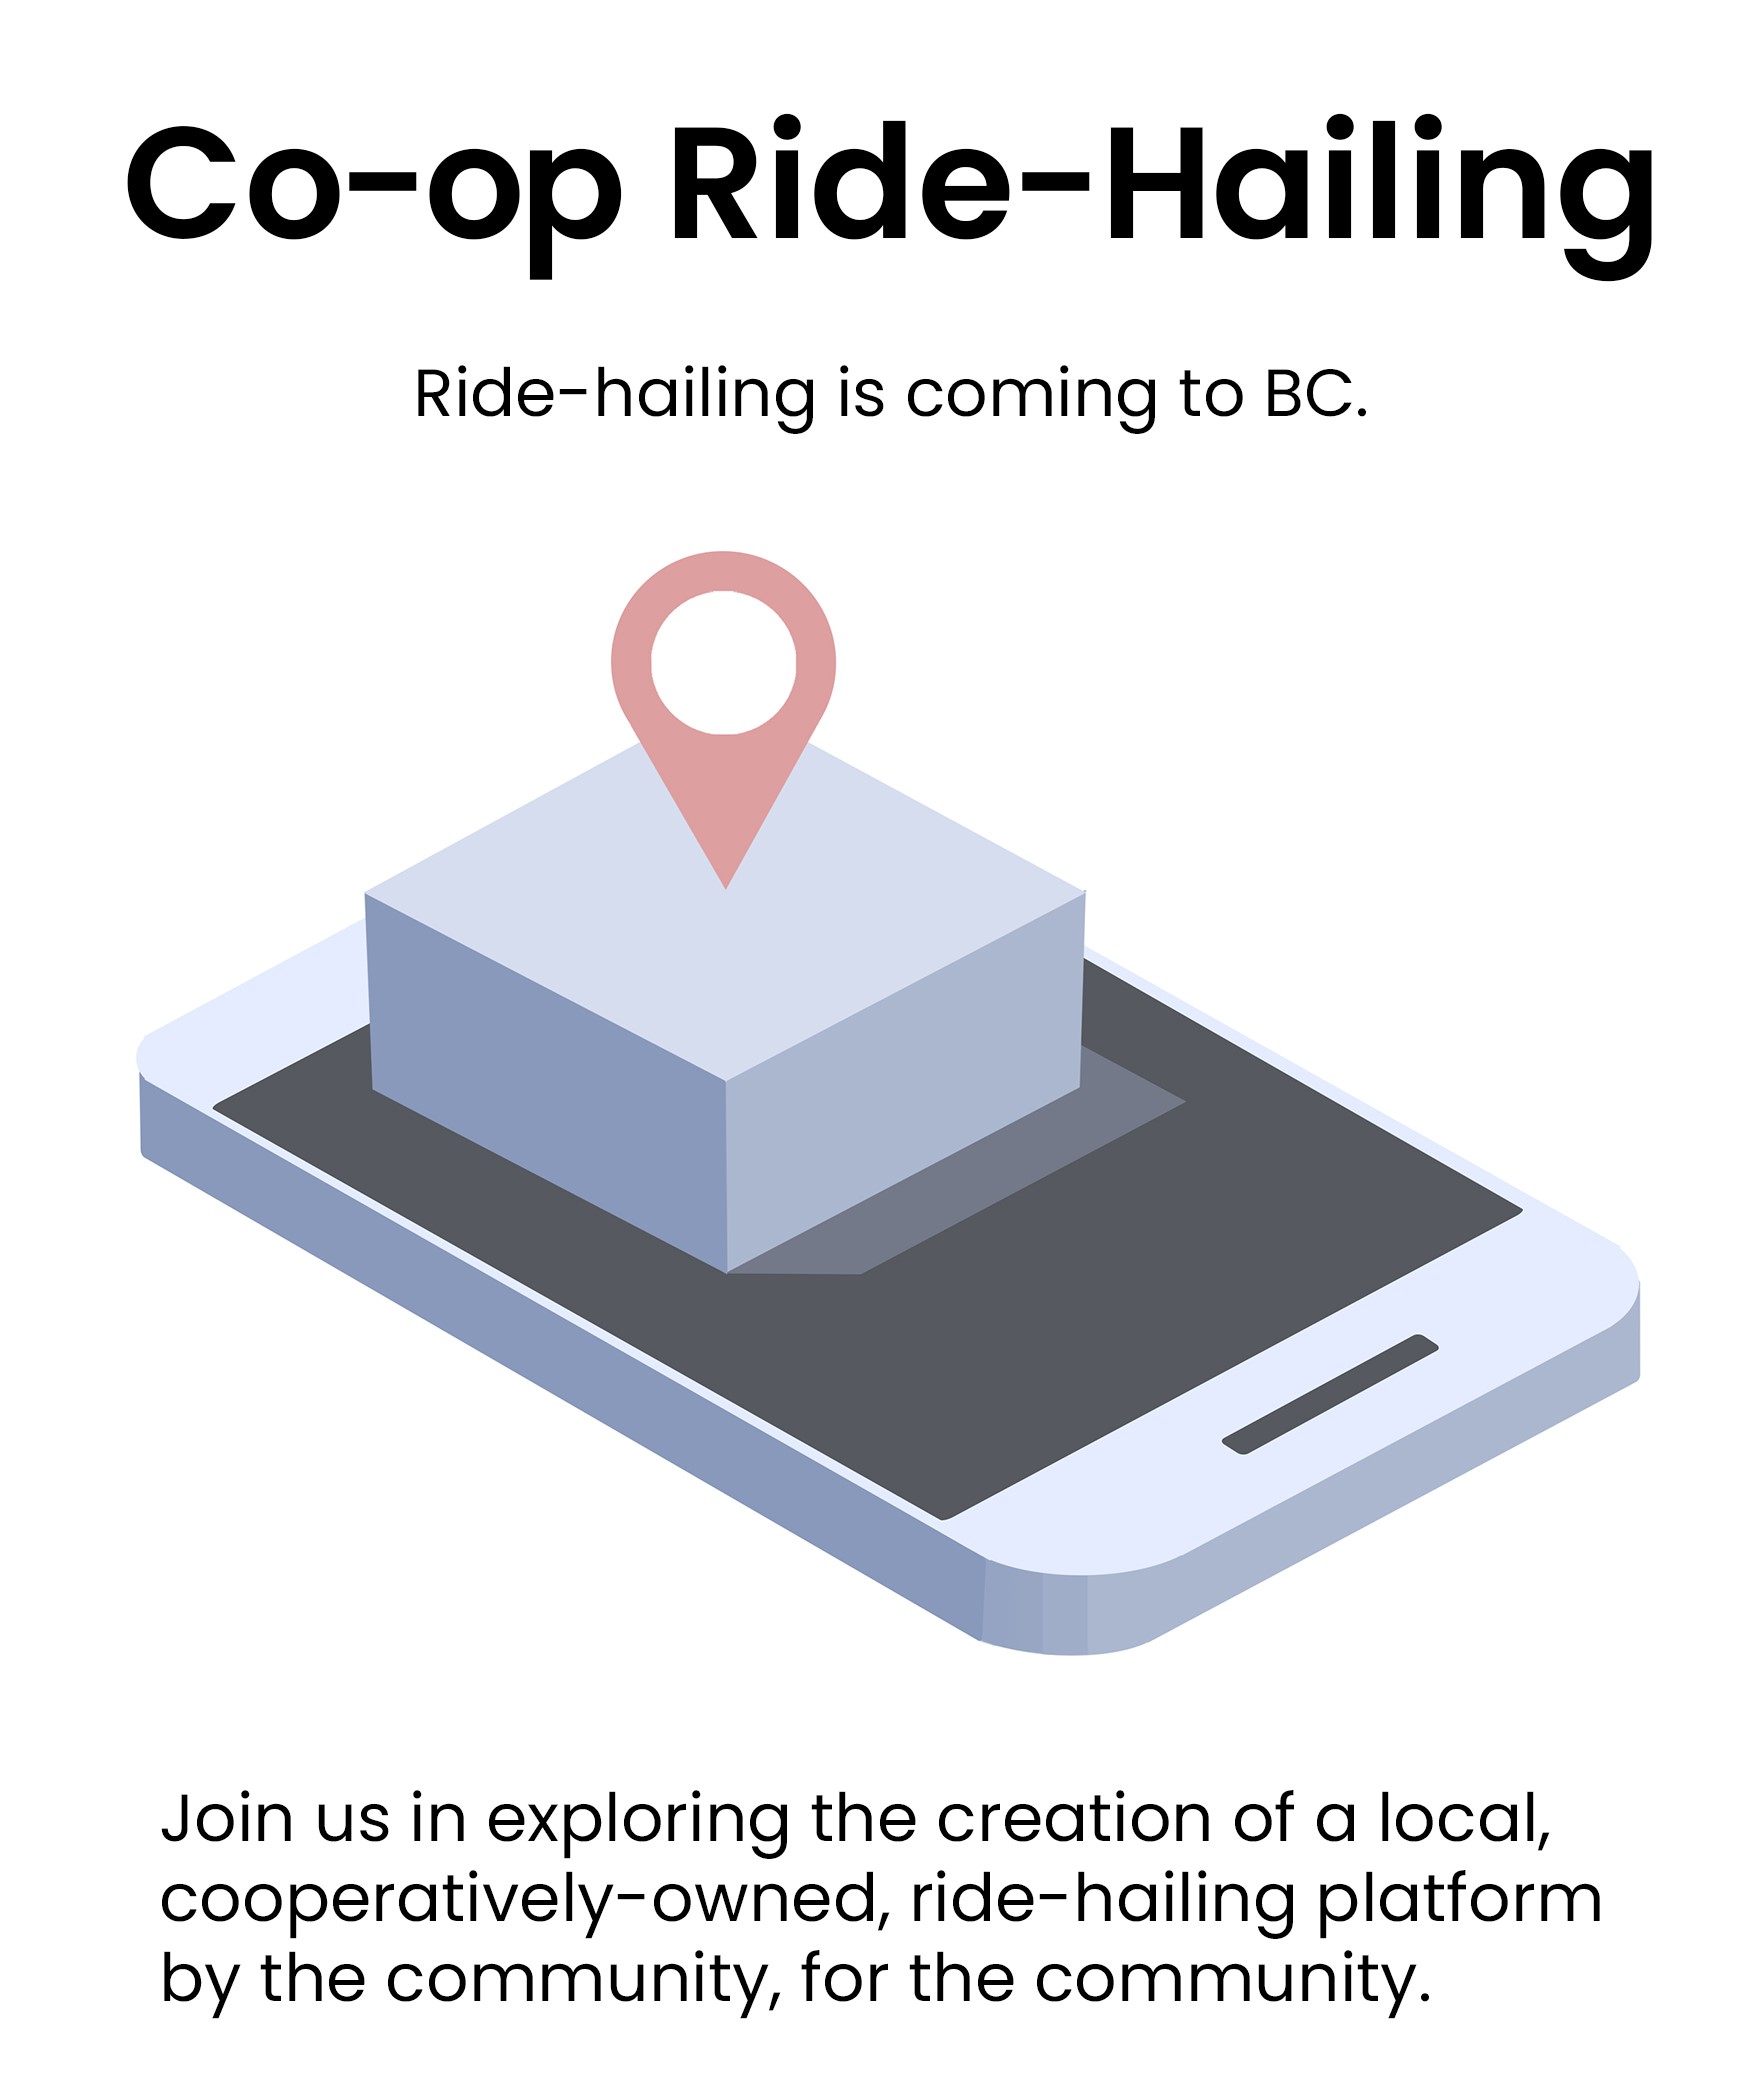 The cover of an informational pamphlet for the ride-hailing project